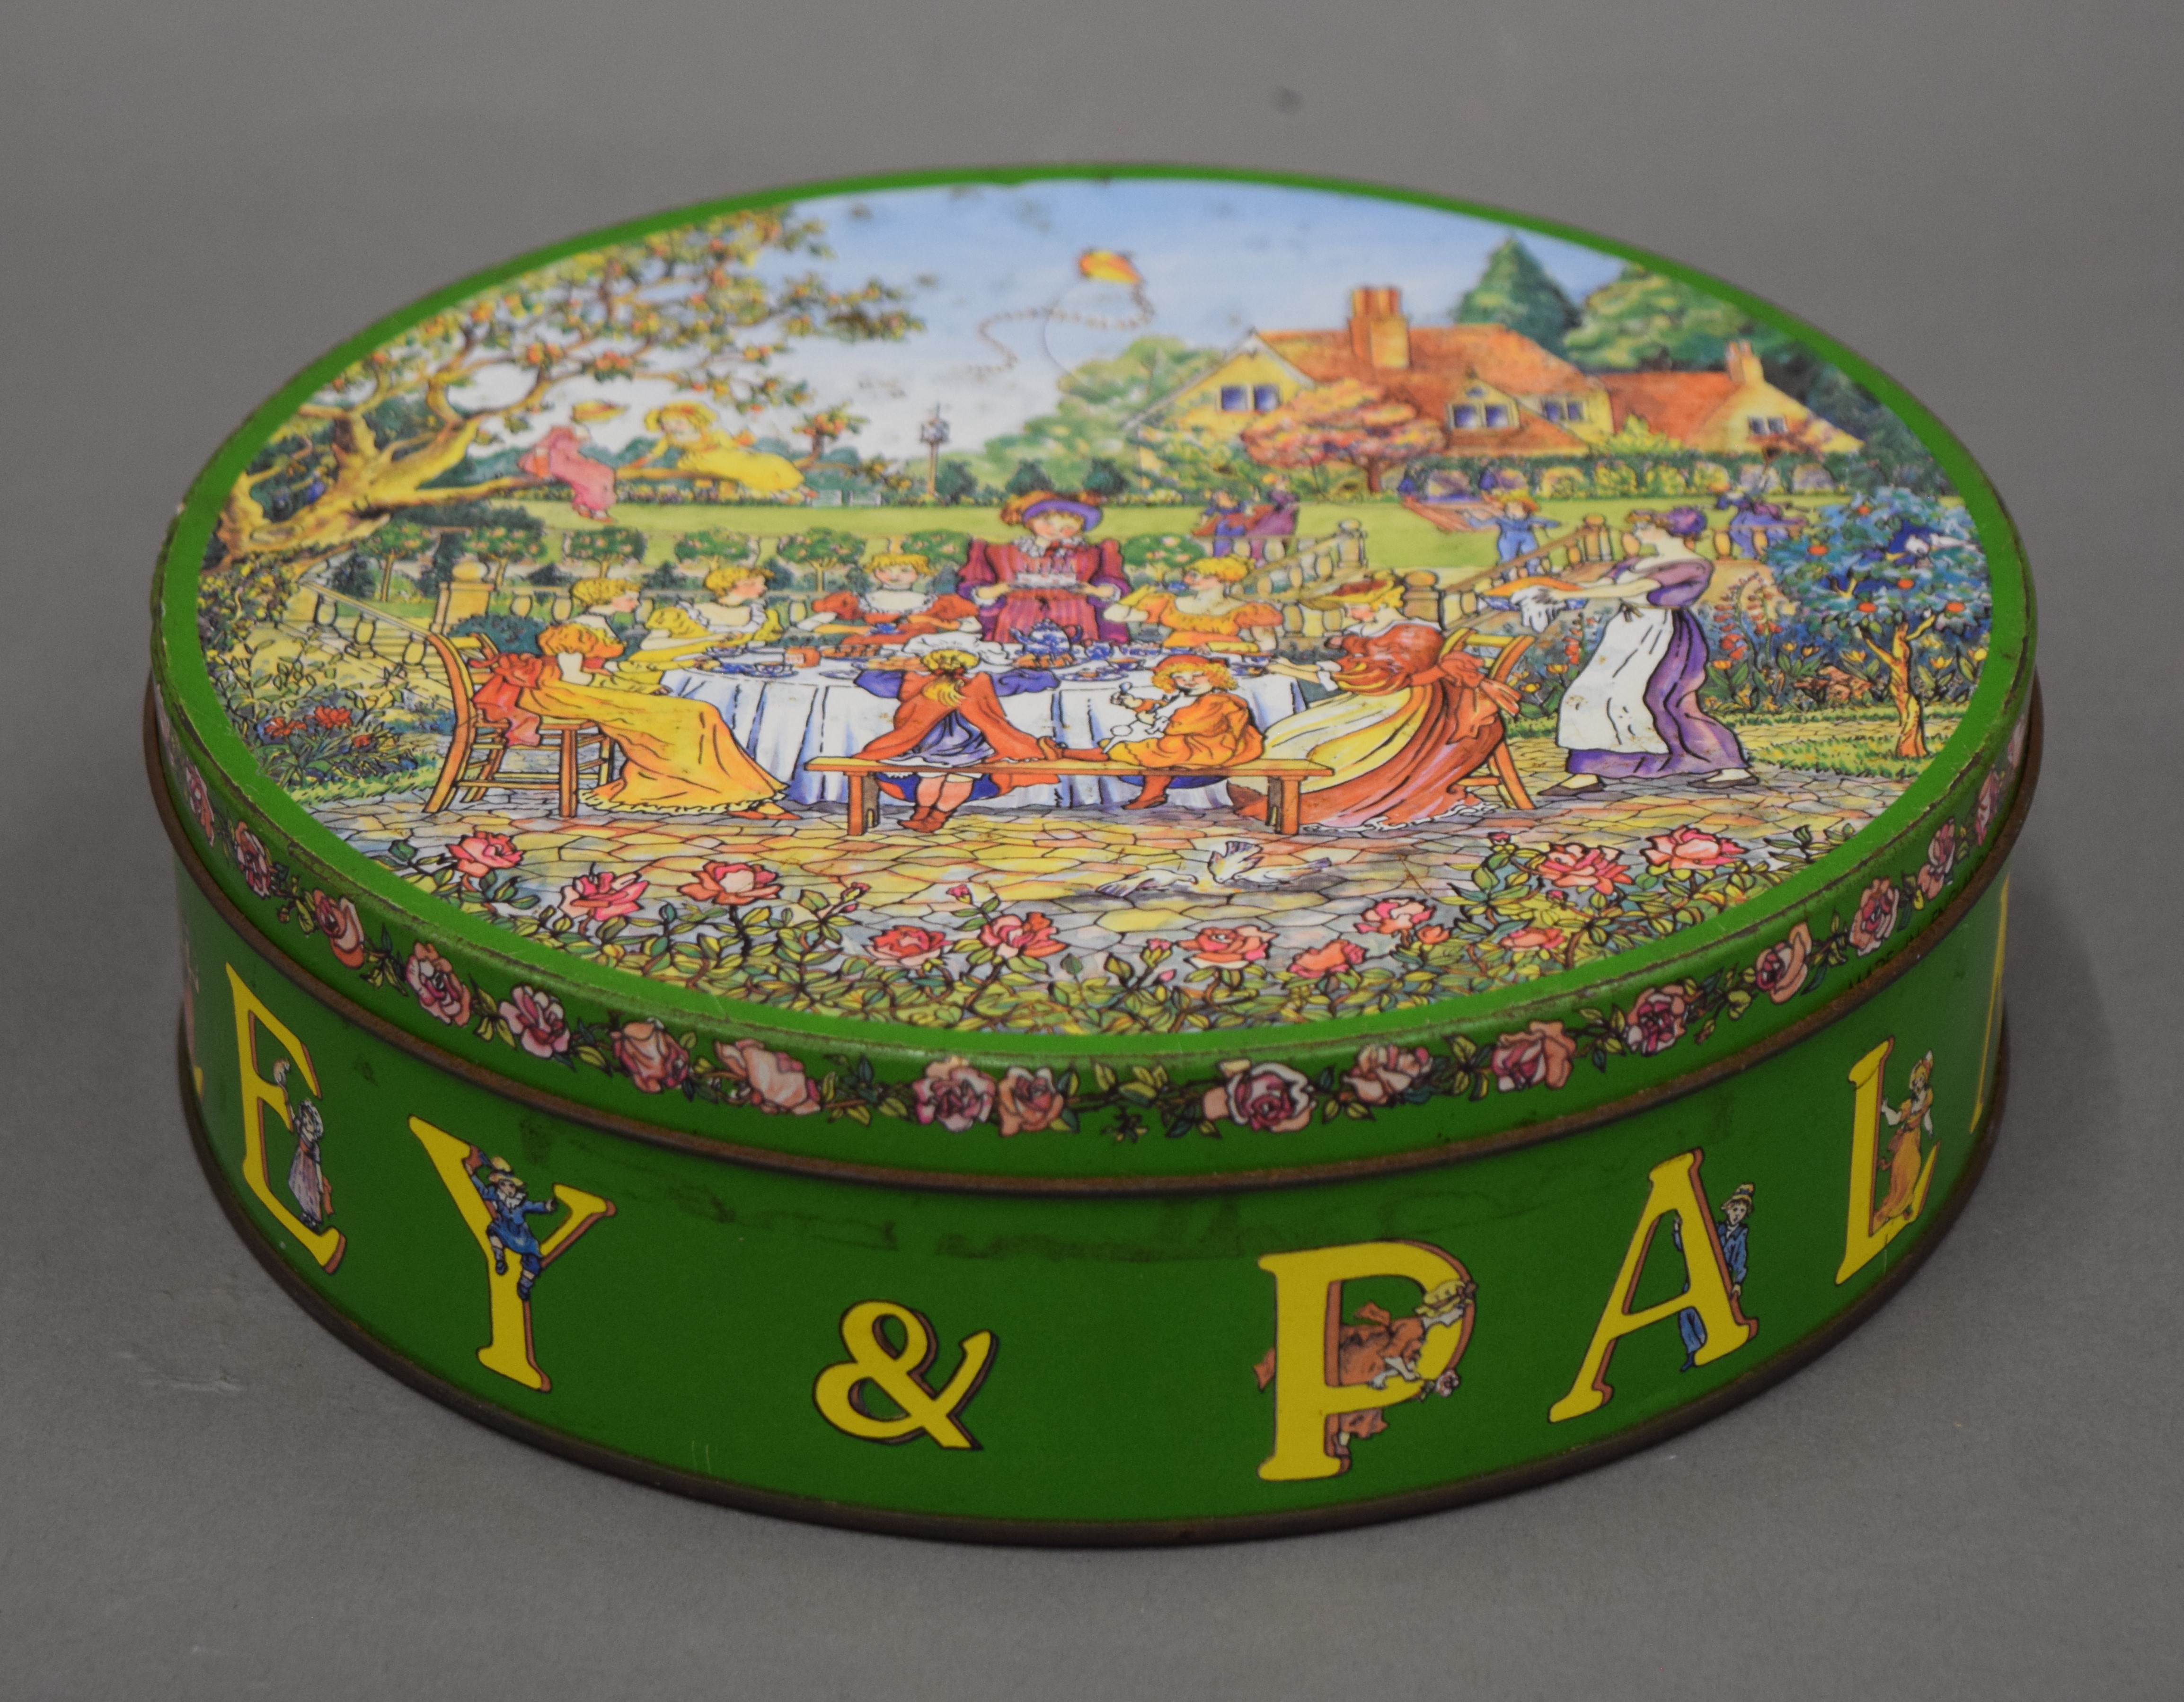 A Huntley and Palmers 'Rude' biscuit tin.